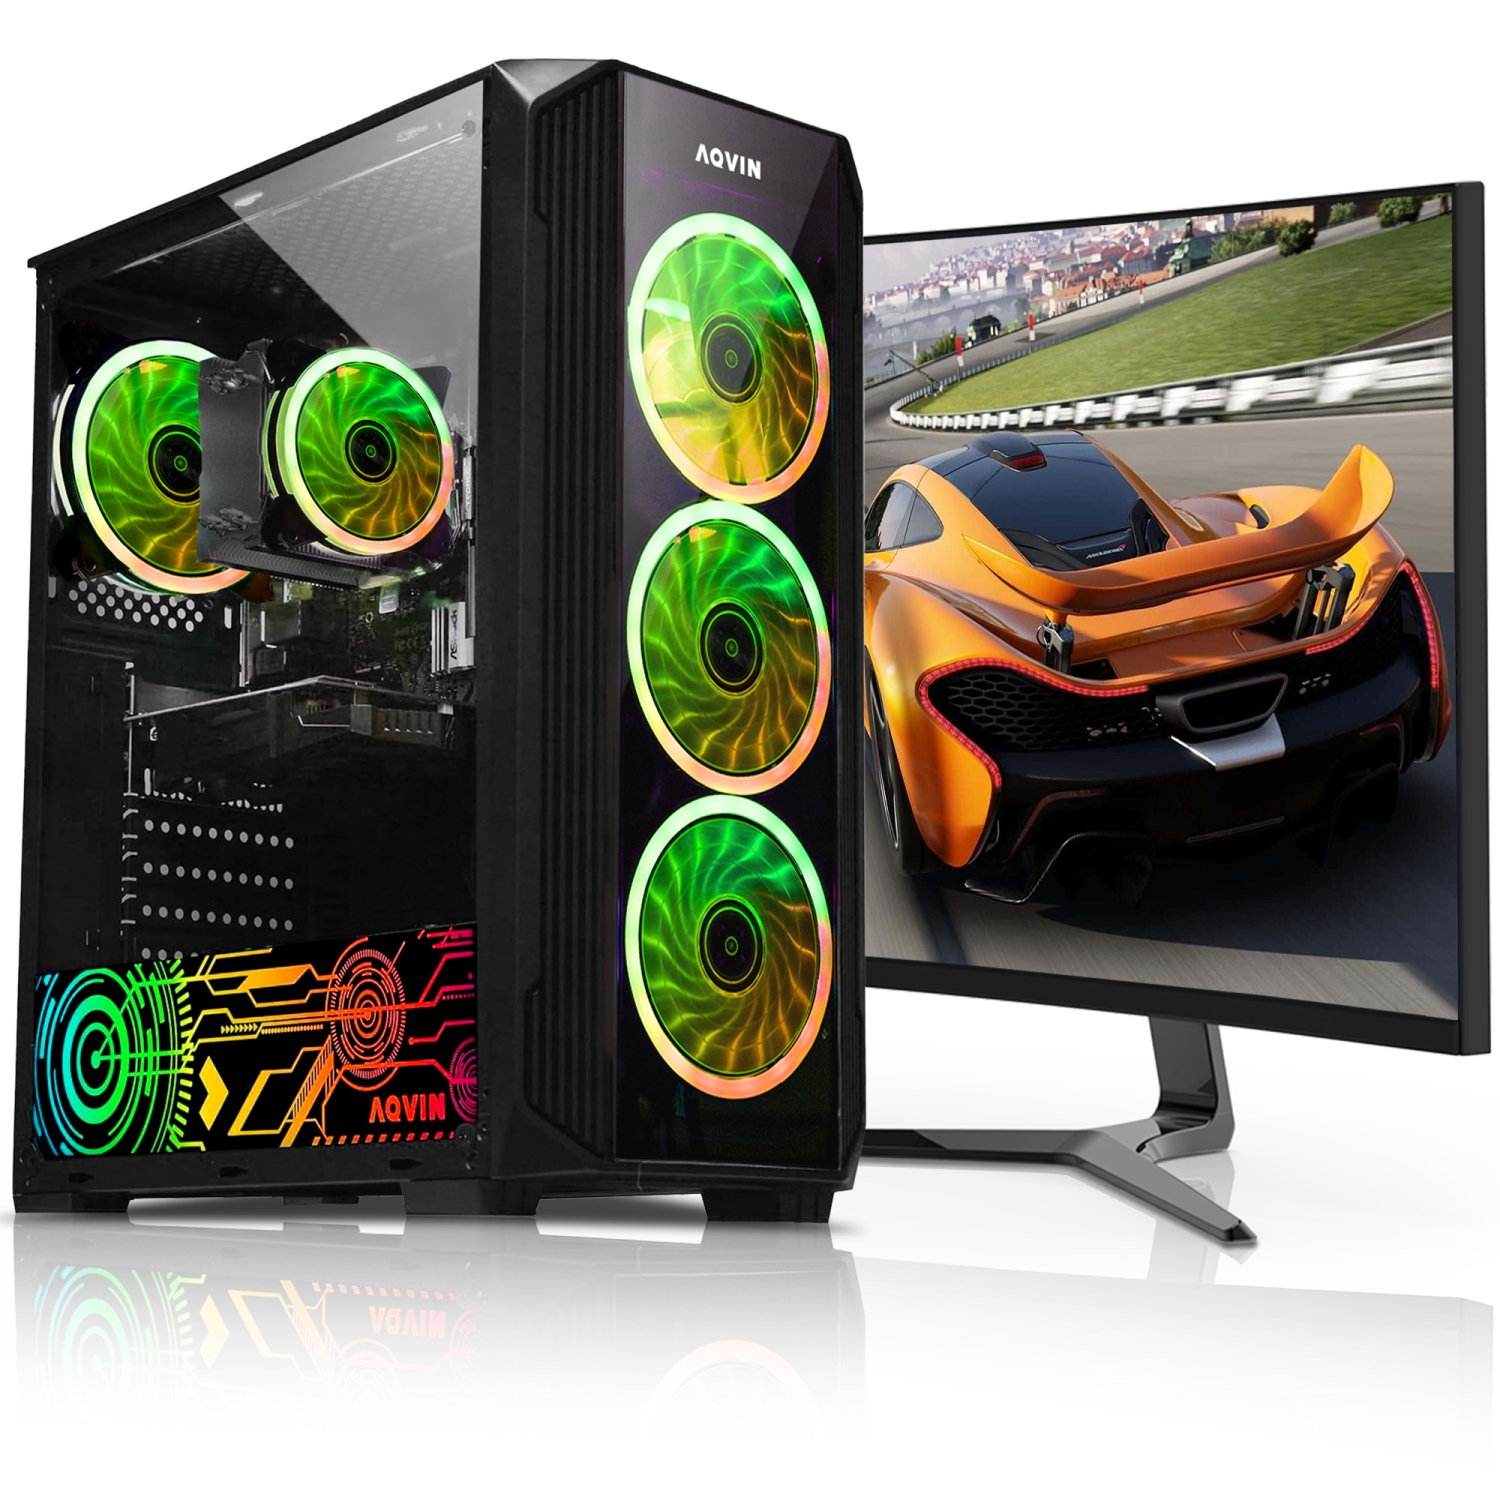 Refurbished (Excellent) - Pre-Built Gaming PC Combo AQVIN ZForce - New 27inch Curved Gaming Monitor/ Intel Core i7/ 32GB RAM/ 1TB SSD/ Windows 10 Pro/ AMD Graphics RX 580 8GB GDDR5